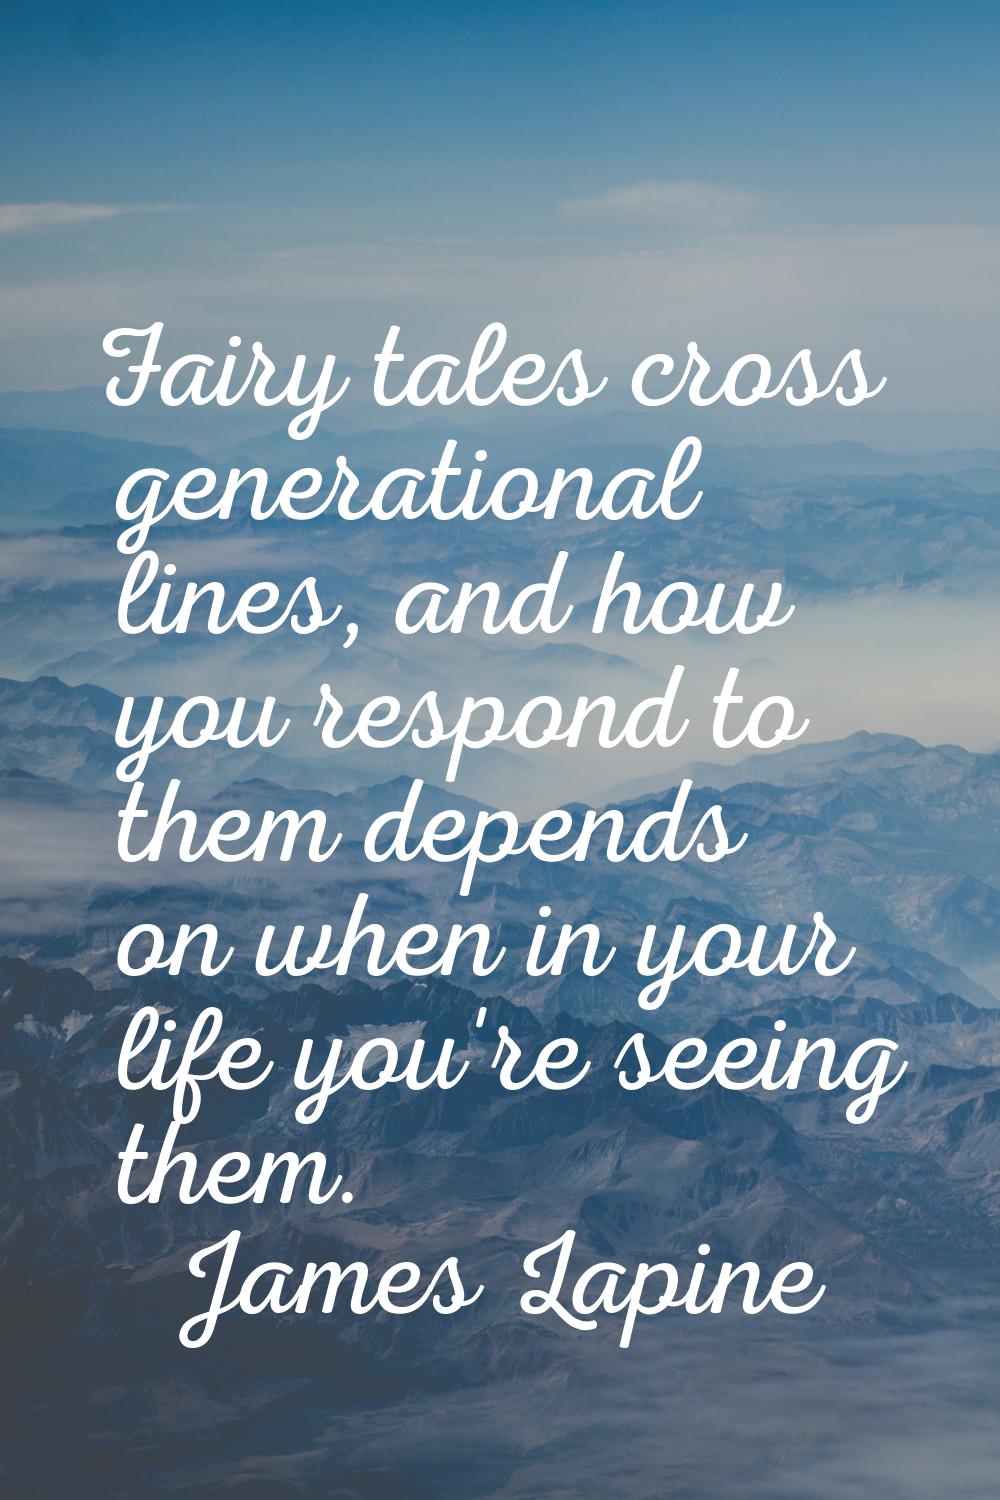 Fairy tales cross generational lines, and how you respond to them depends on when in your life you'